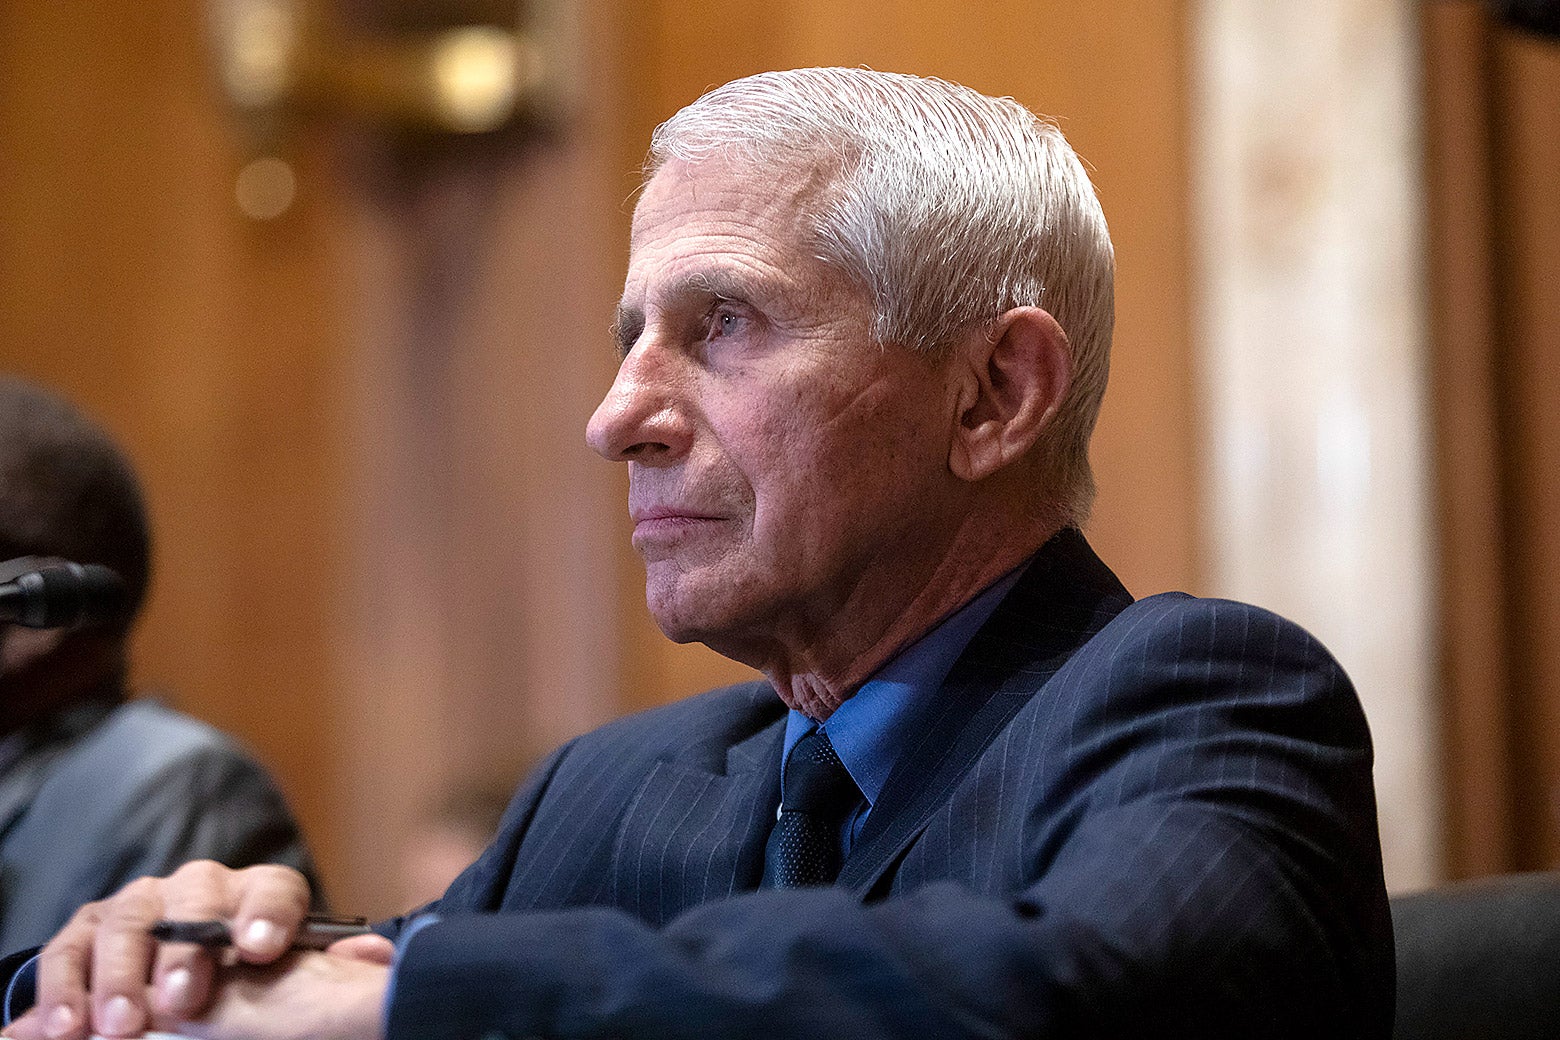 Dr. Anthony Fauci sitting calmly at a table with his hands folded and a pen between his fingers.